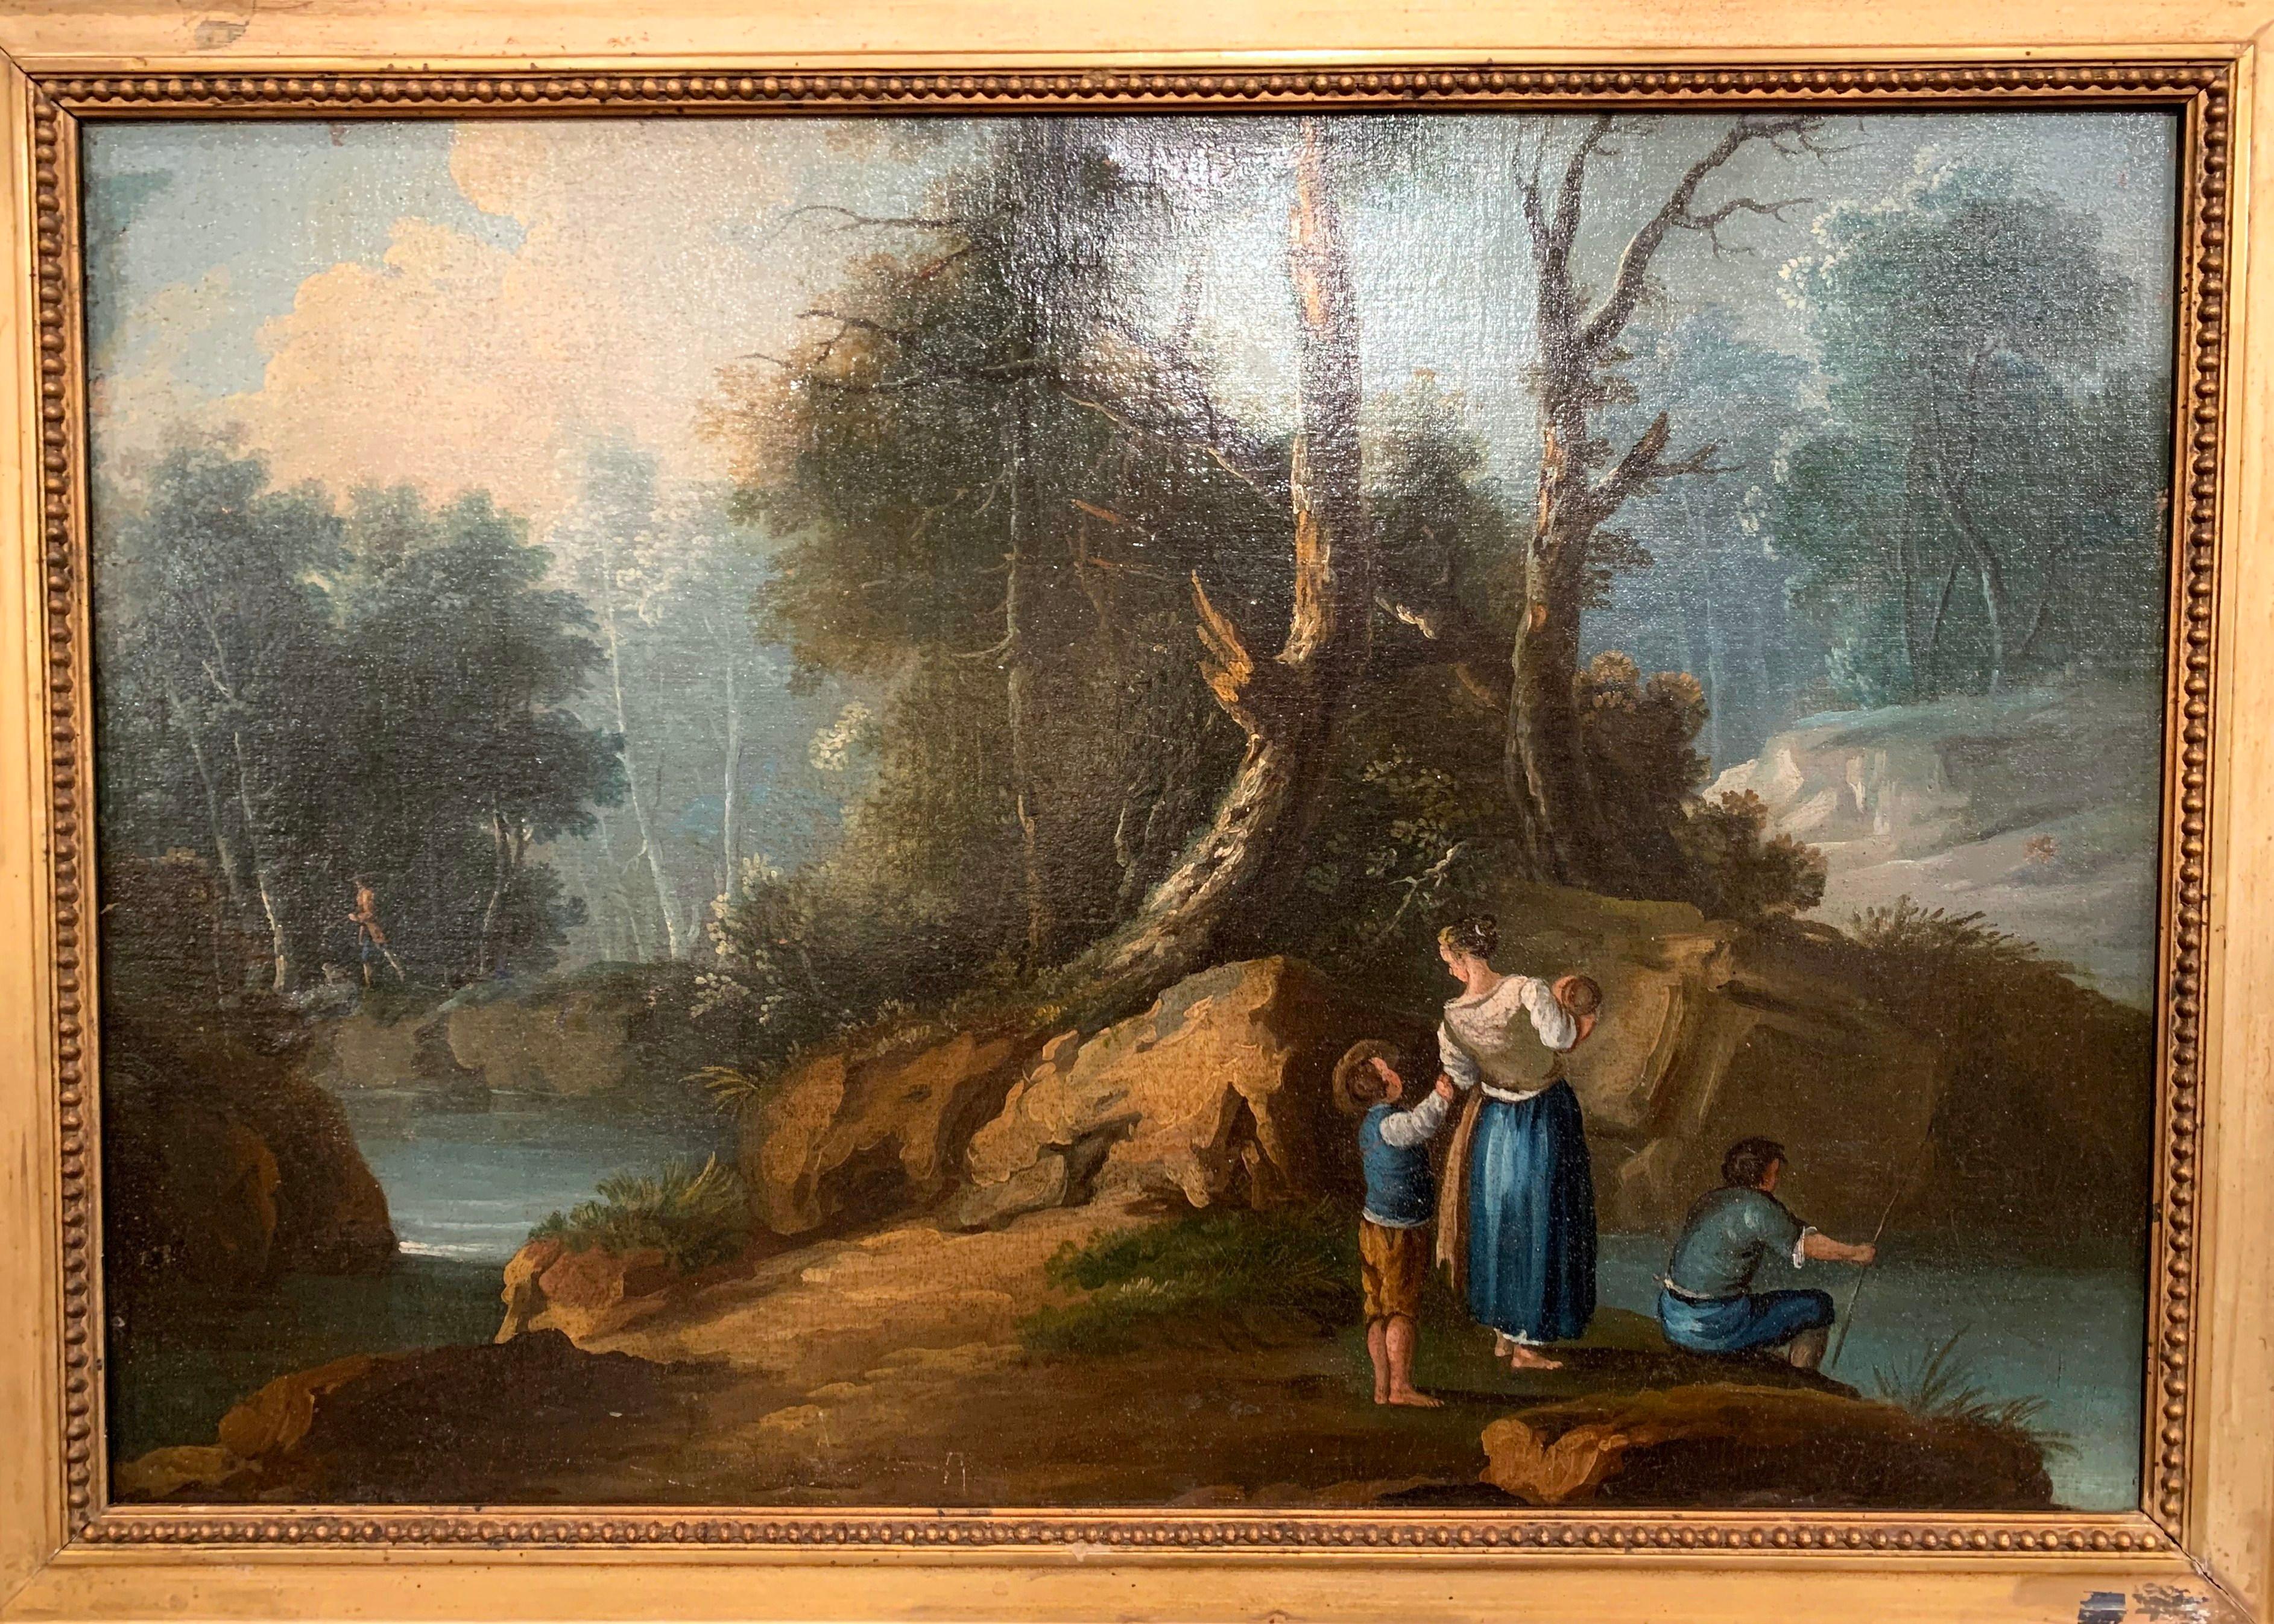 Set in the a carved giltwood frame with decorative beads, the antique Louis XVI painting was created circa 1850; the art work depicts a pastoral scene with ponds and people in a woody surrounding. A man is fishing while a woman is attending a young